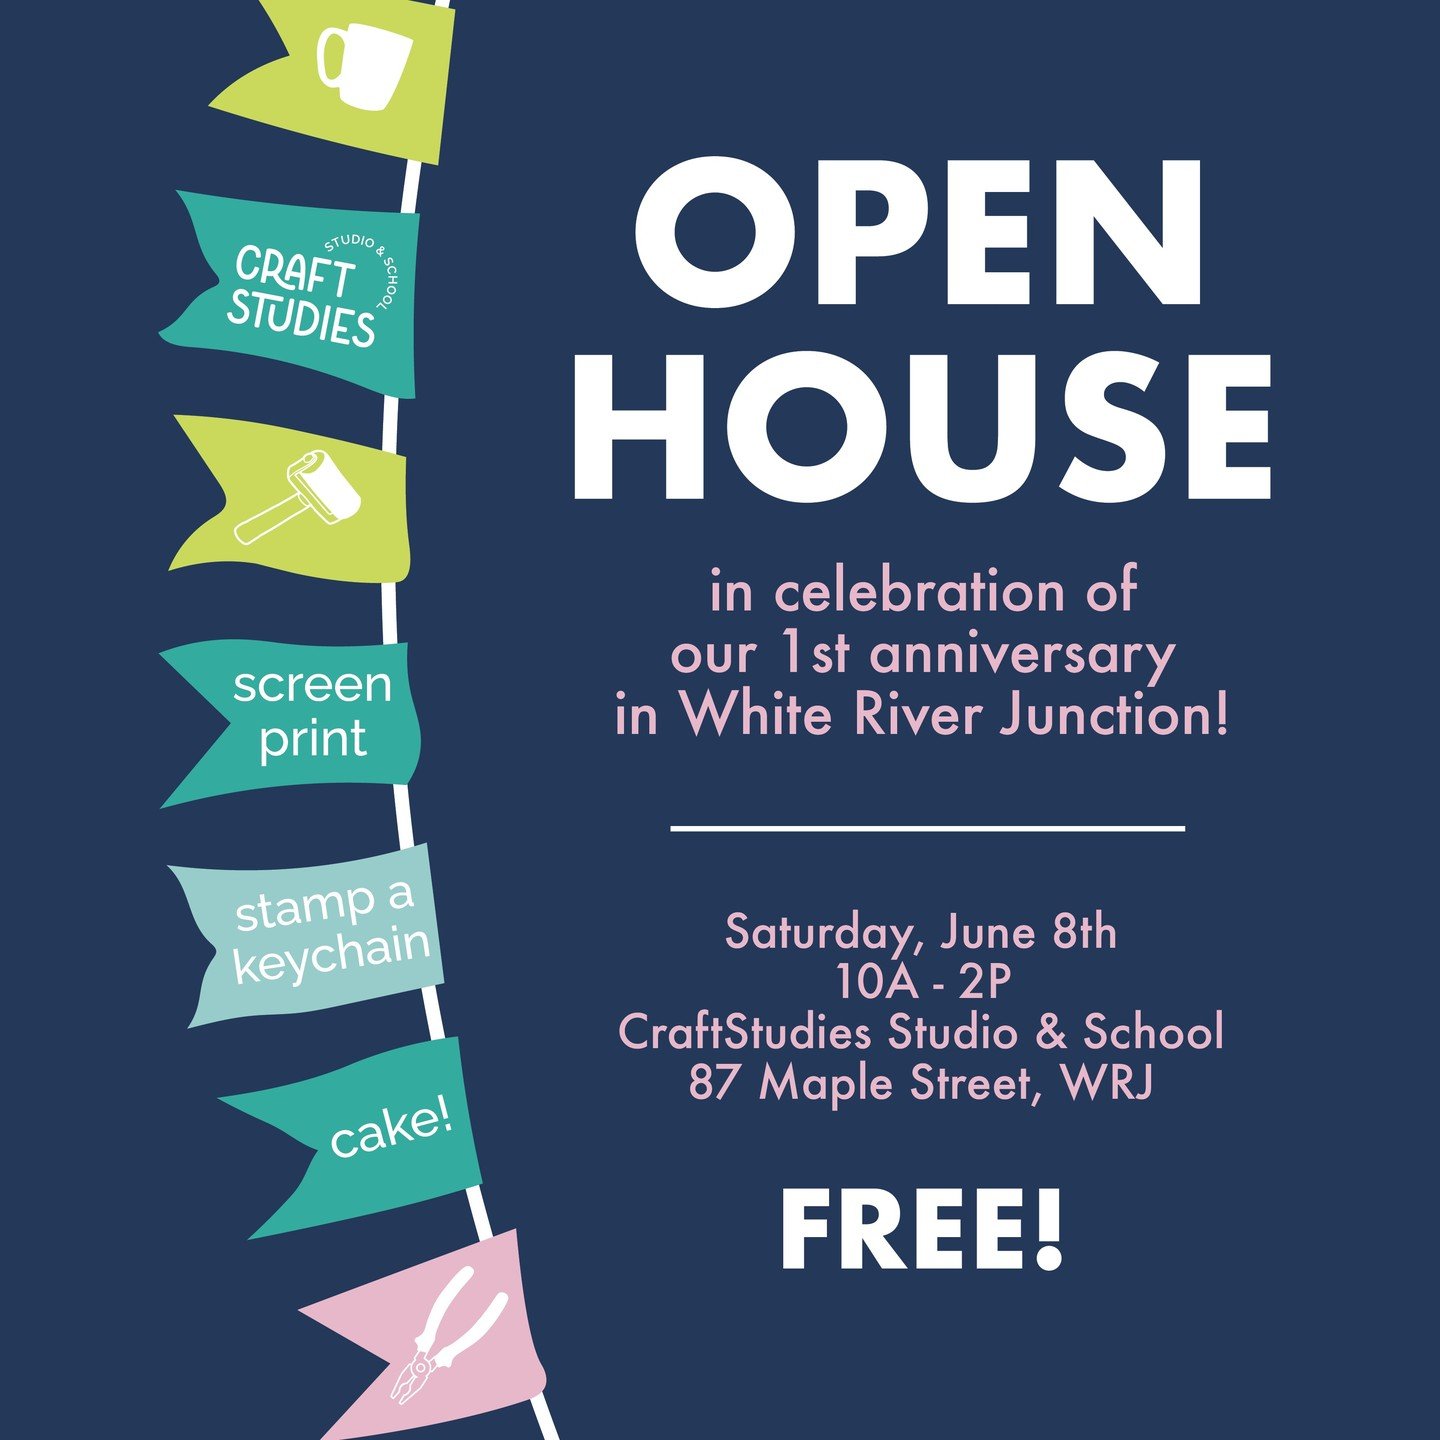 CraftStudies is proud to announce an Open House event on Saturday, June 8th to commemorate the first anniversary of classes, workshops, and community events in their White River Junction studios! The Open House promises a day filled with hands-on act